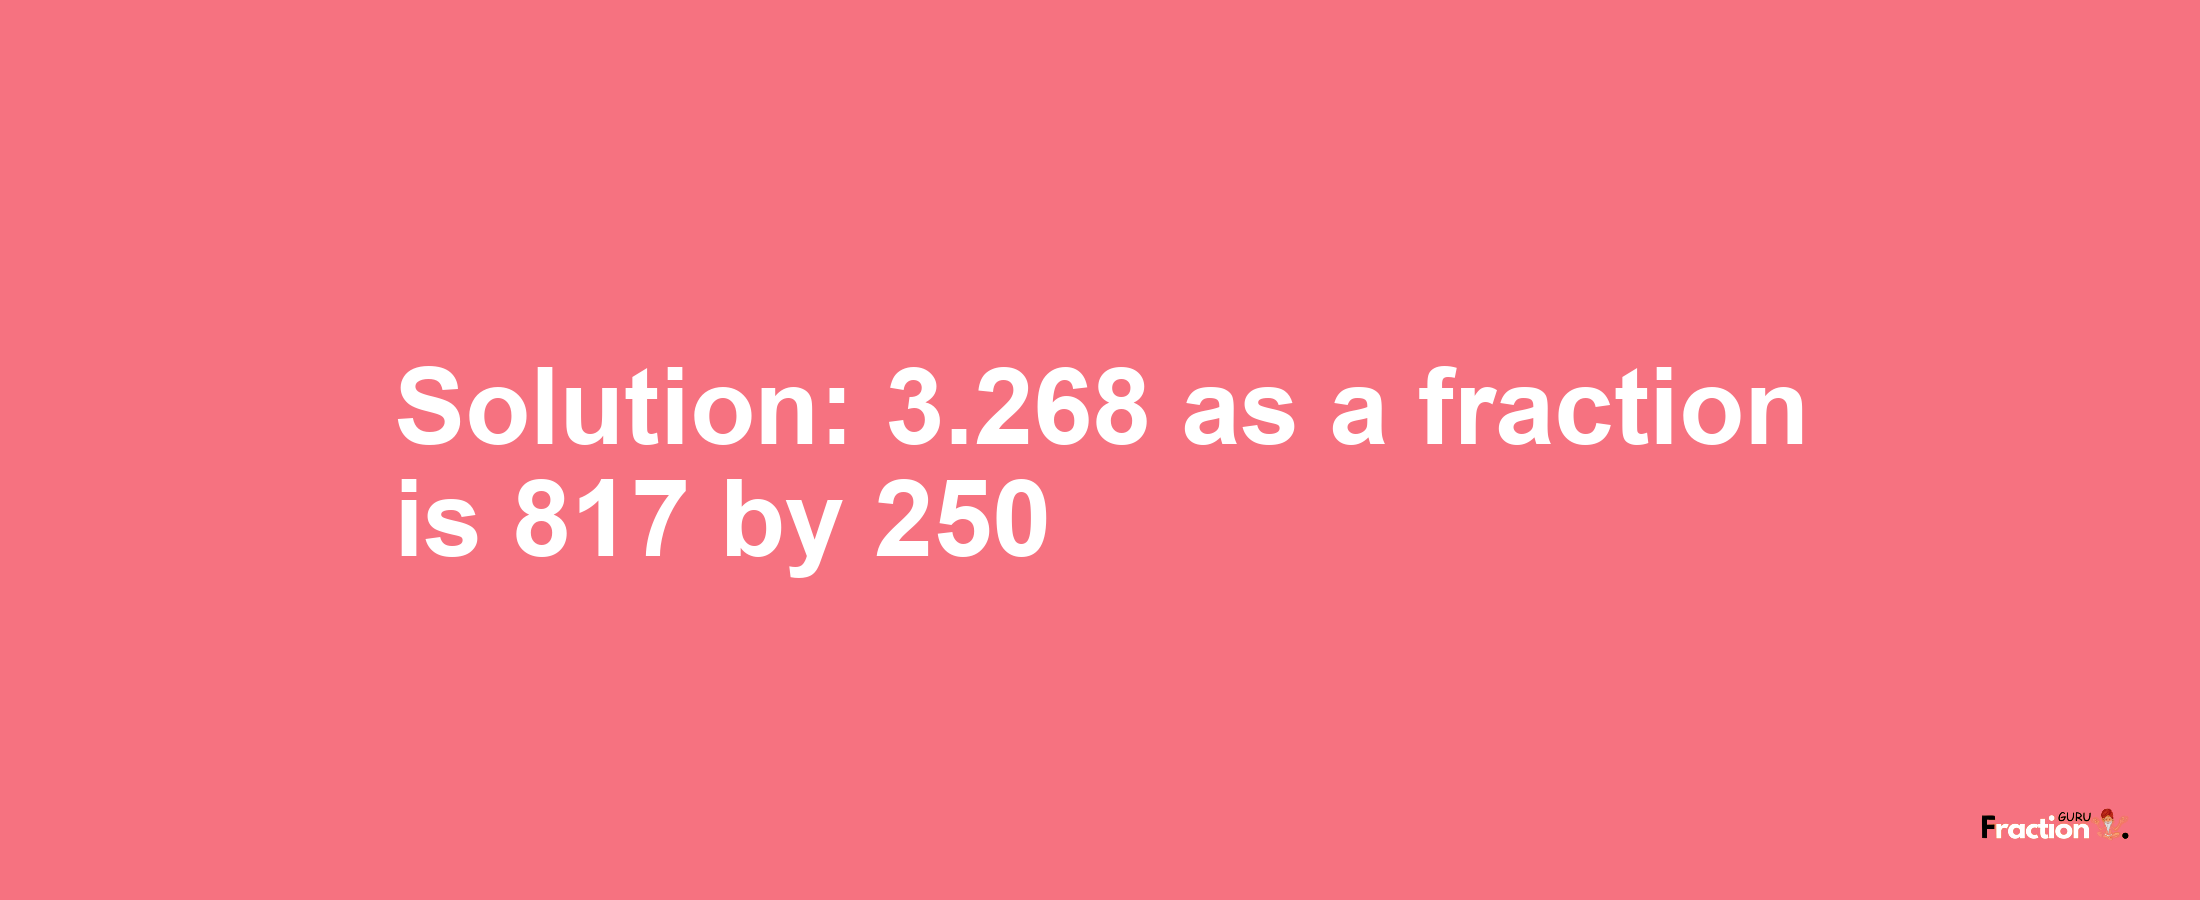 Solution:3.268 as a fraction is 817/250